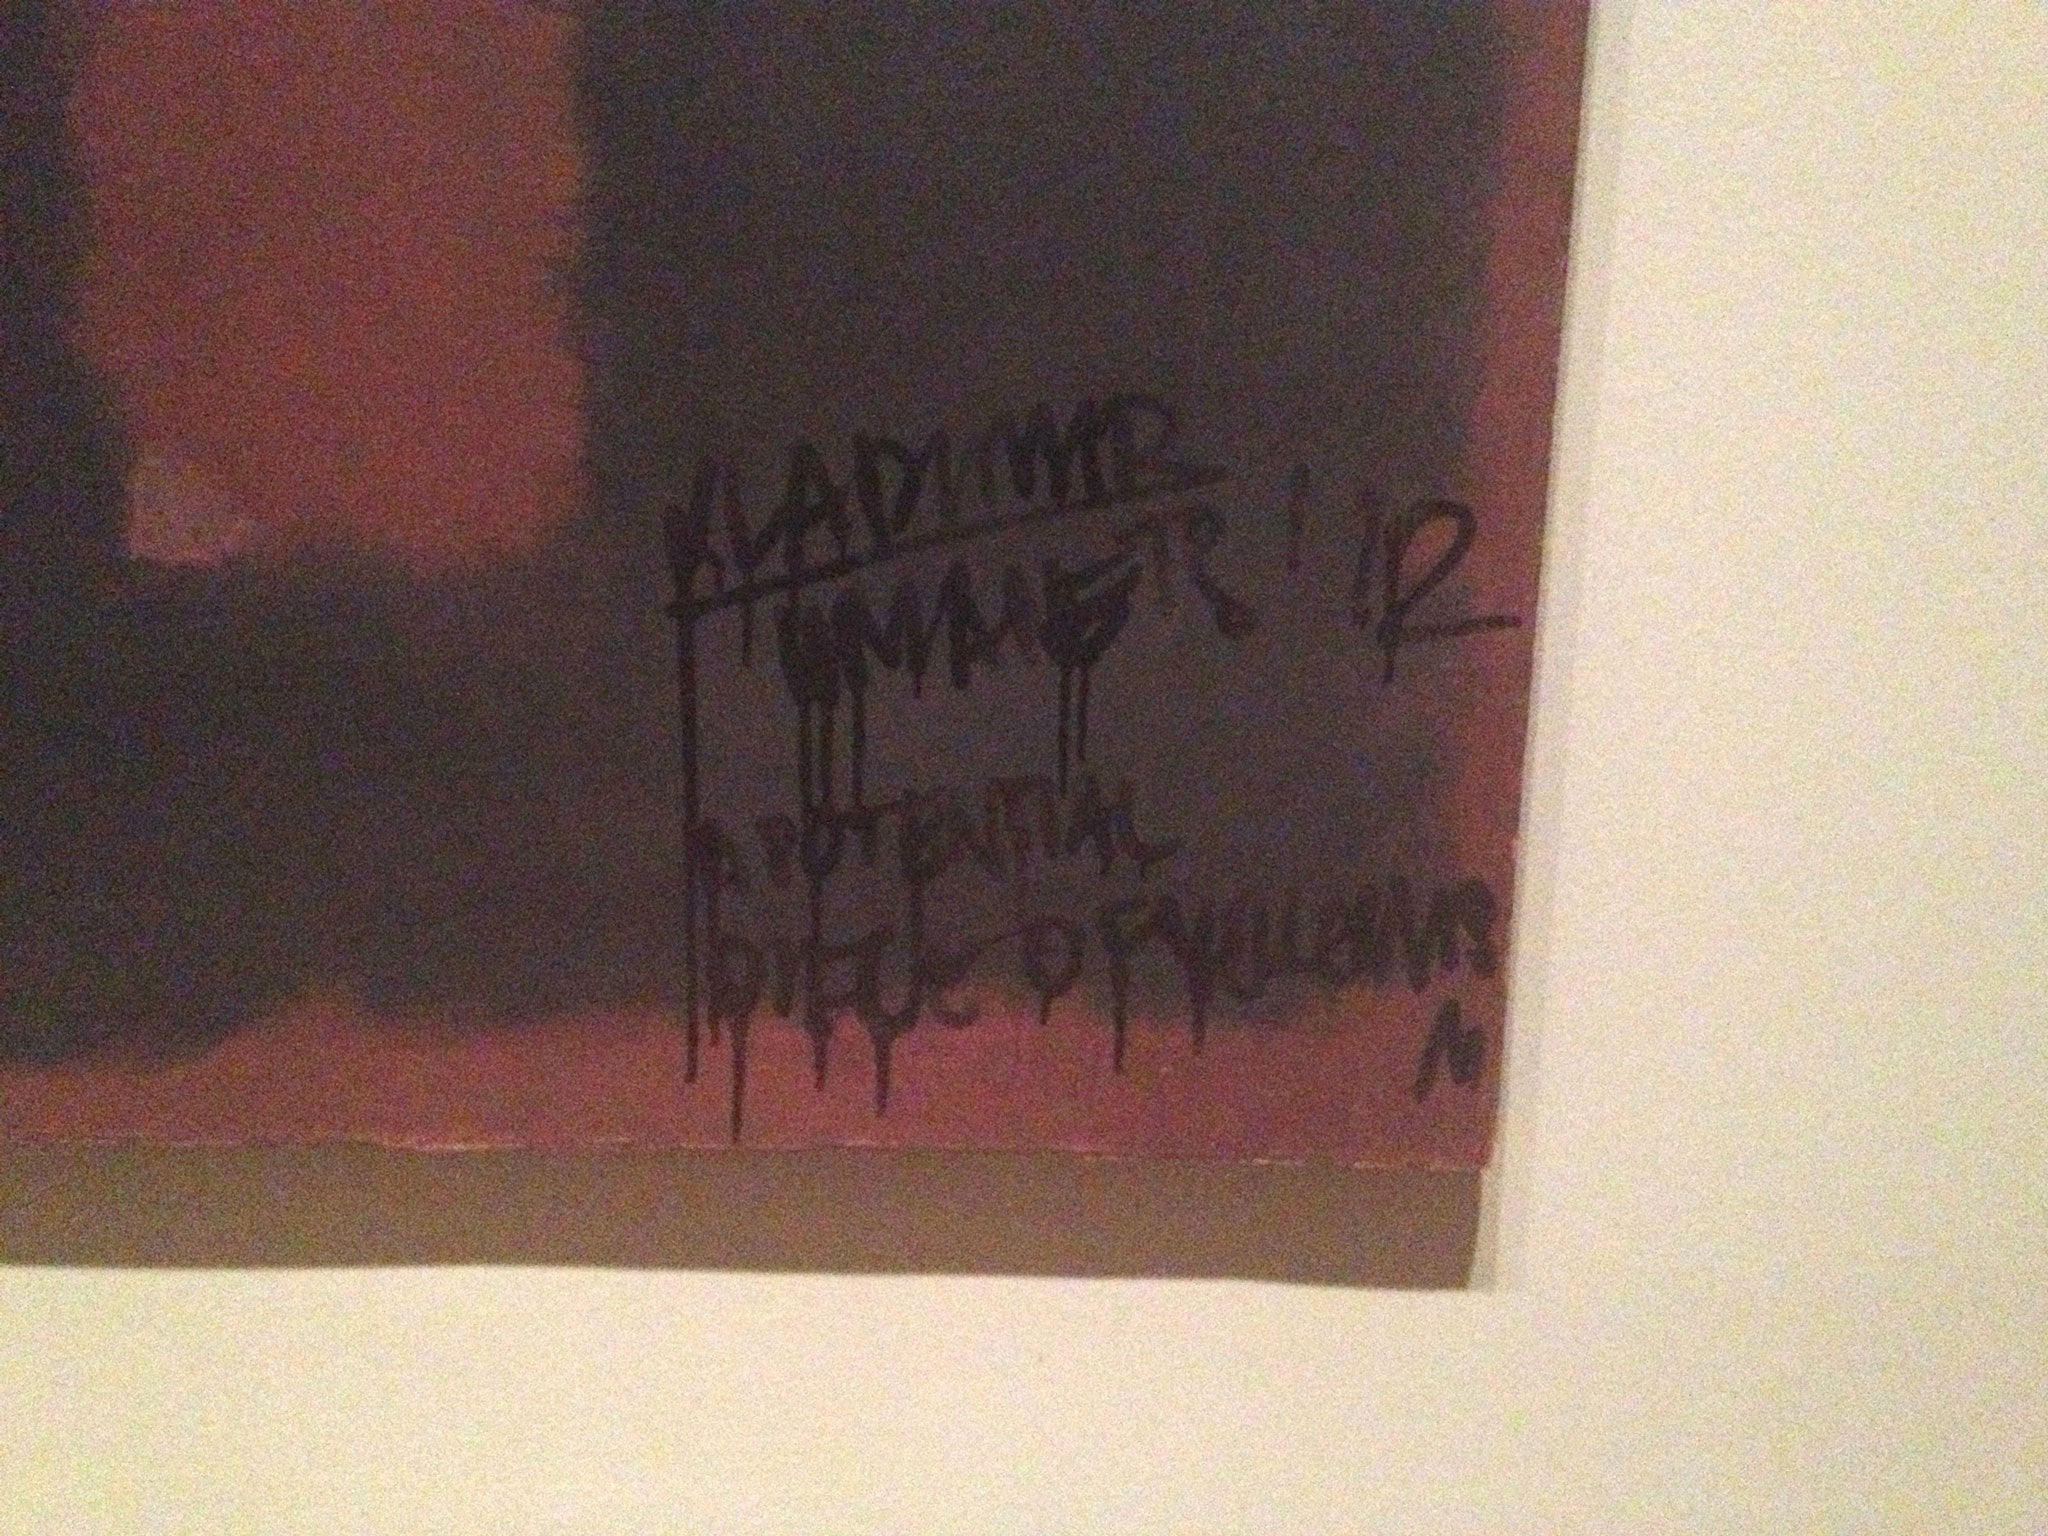 The defaced Rothko painting